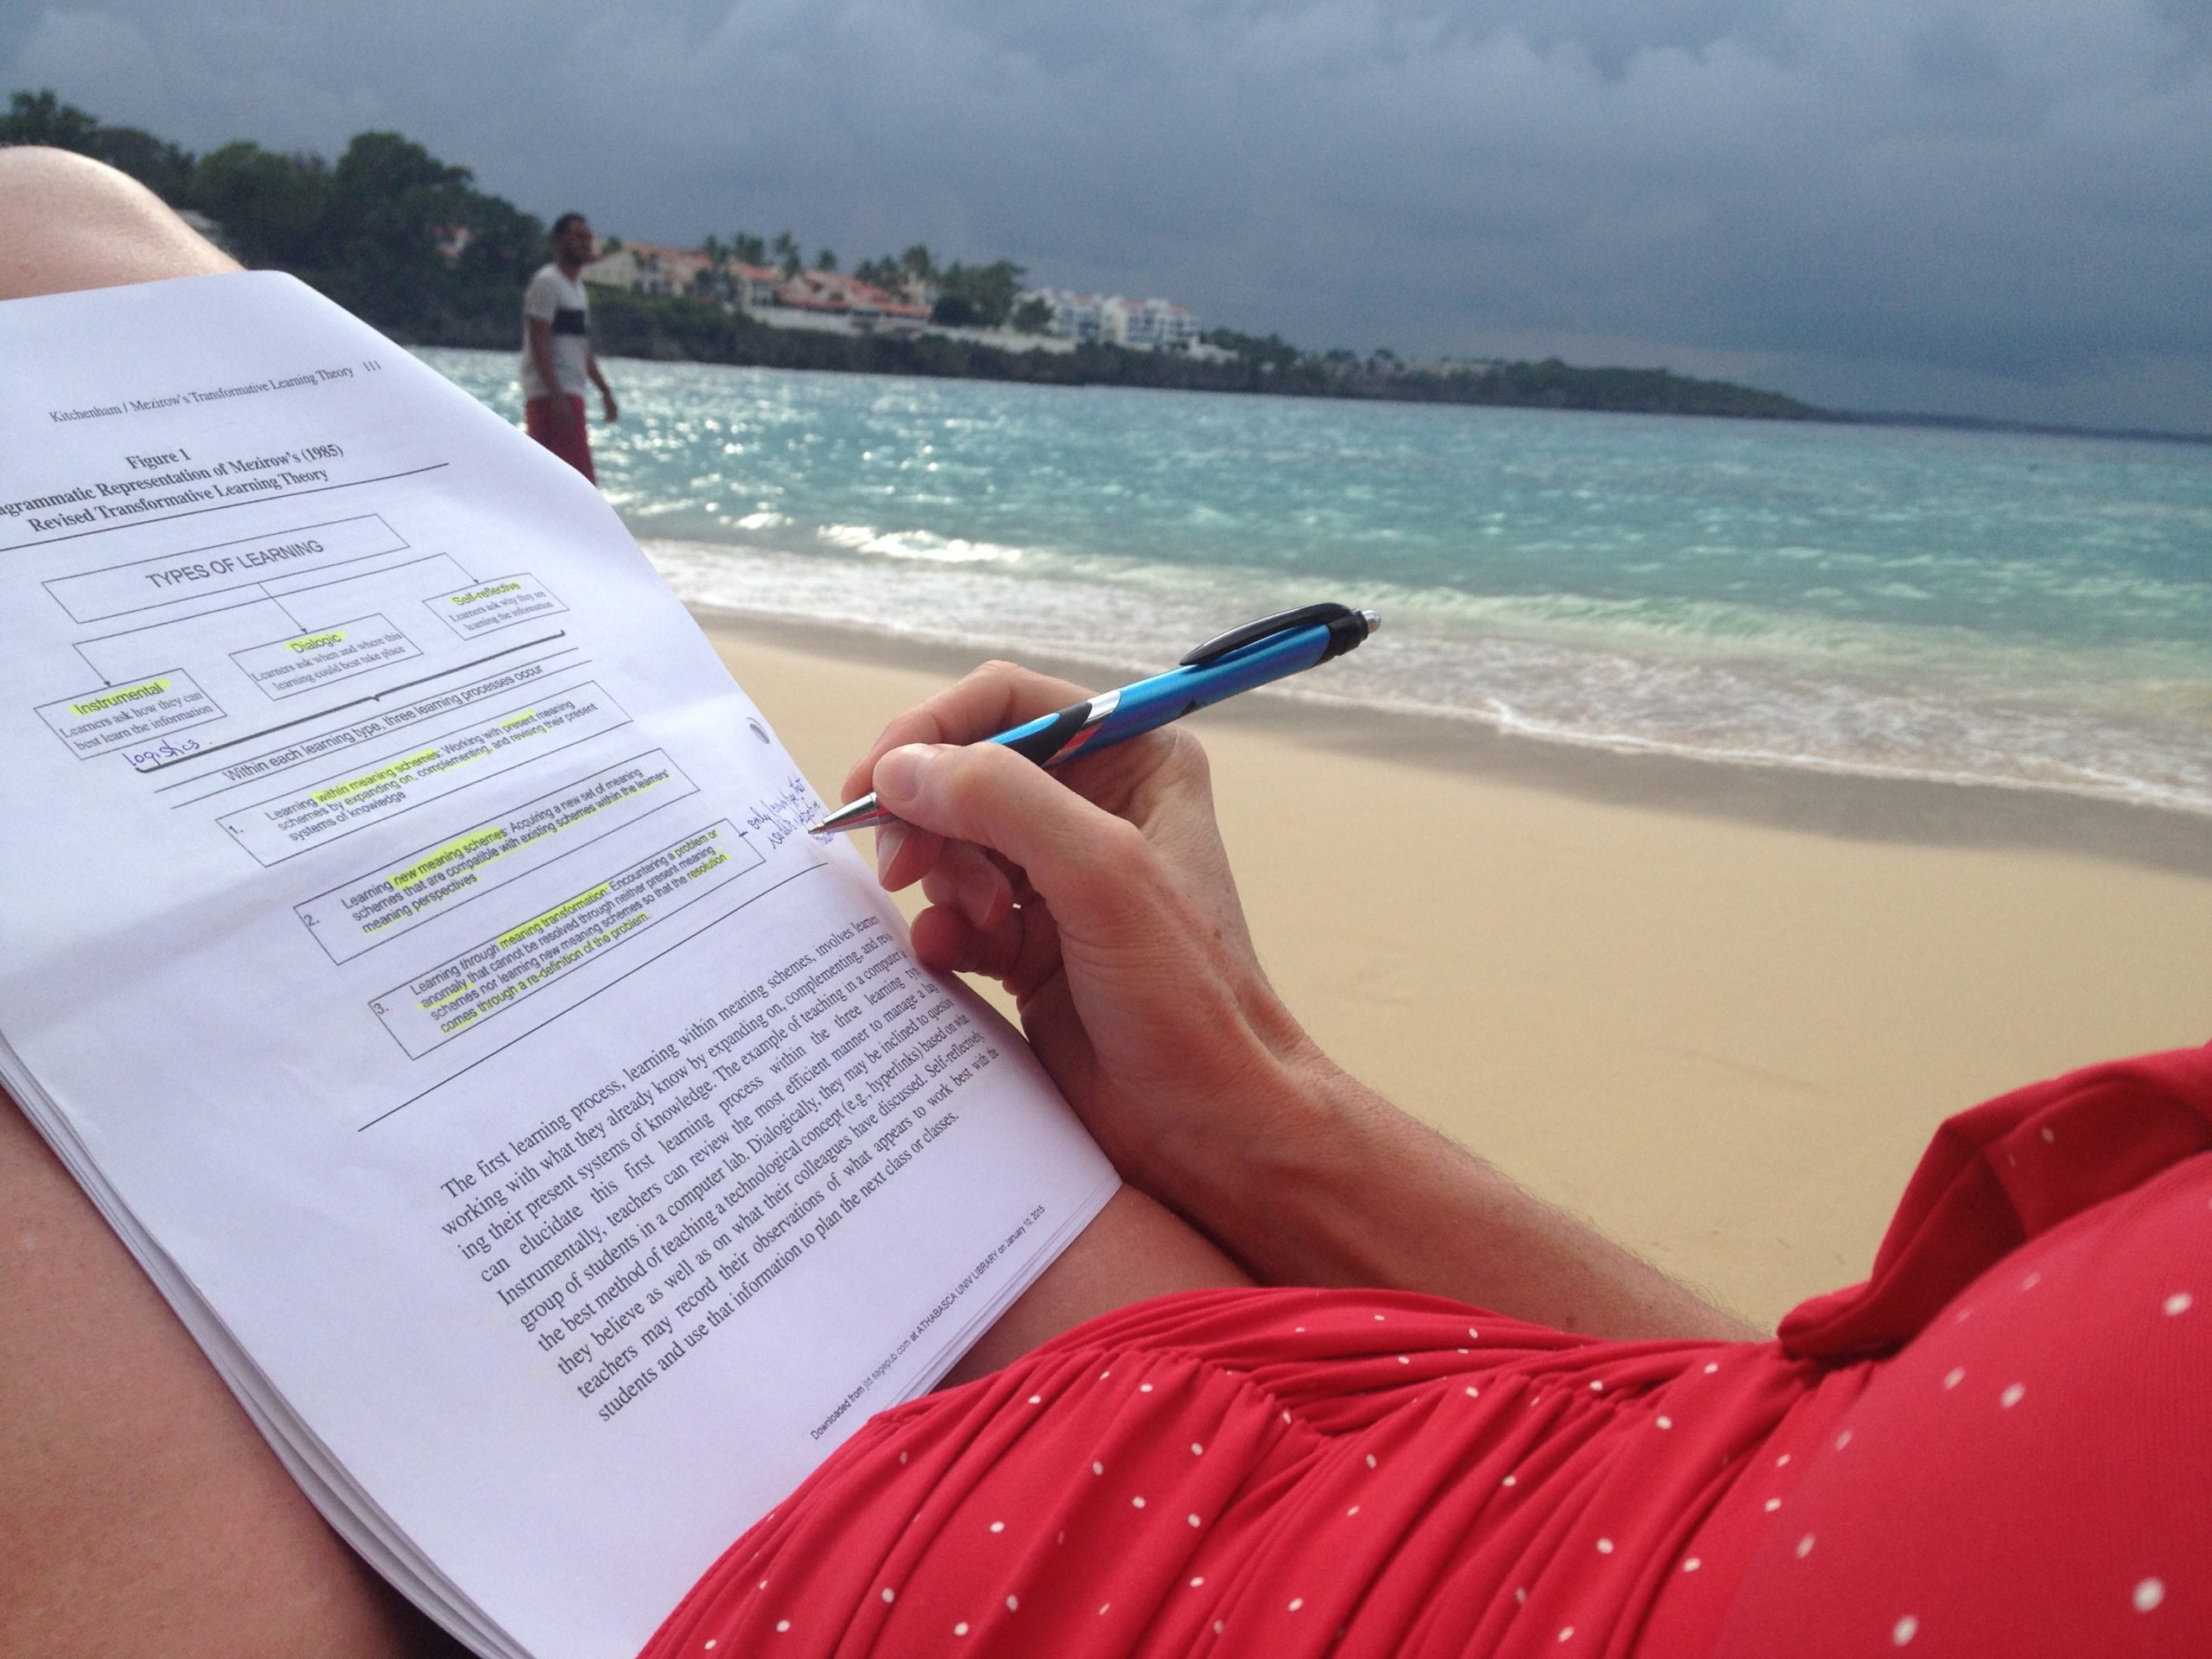 A person making notes on a page balanced on their knees. There is a sandy beach and ocean in the background